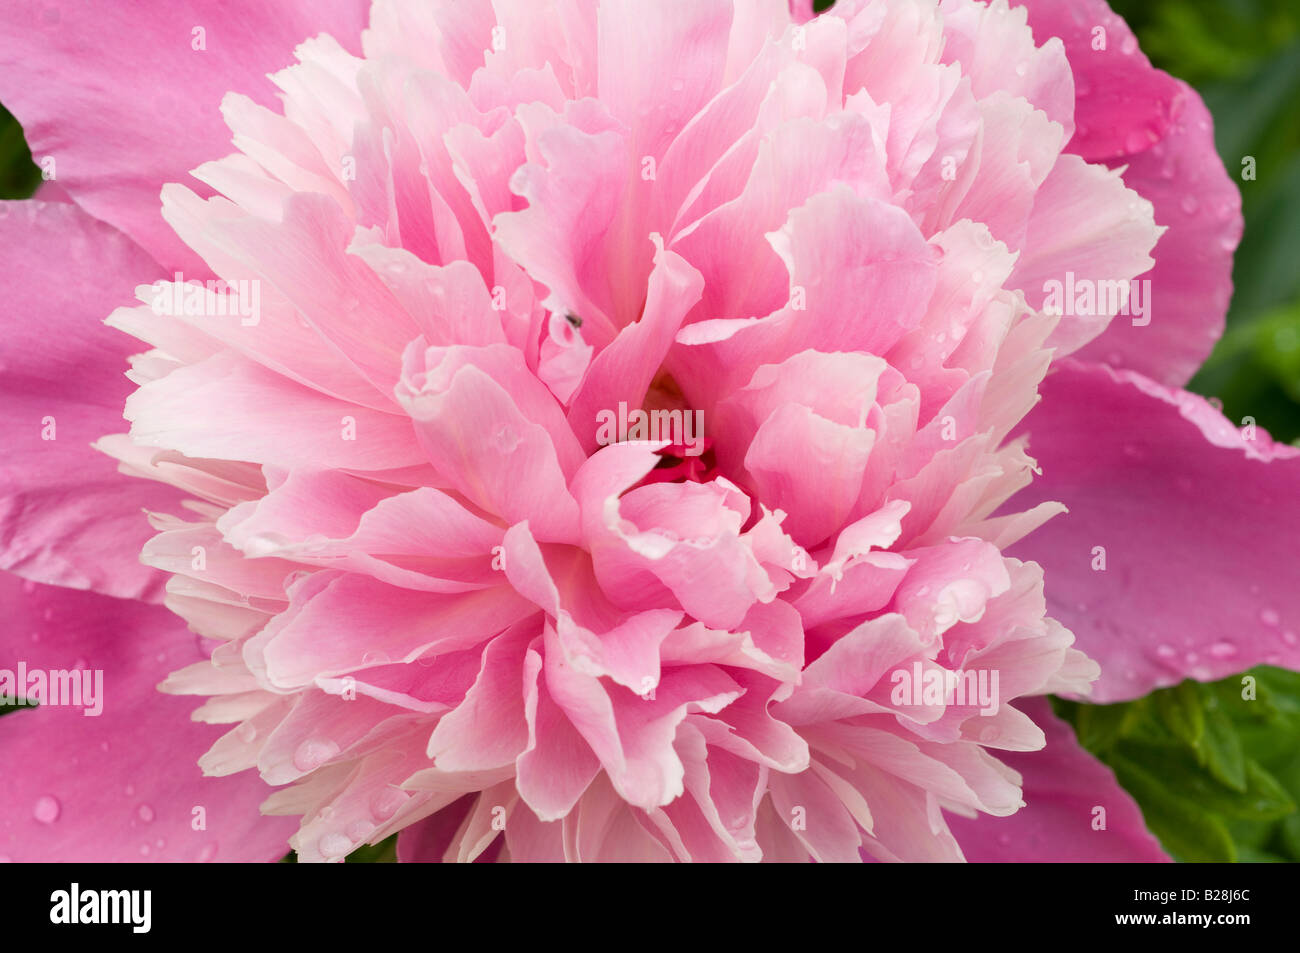 heart of a giant pink and white Common Peony Paeonia officinalis Stock Photo